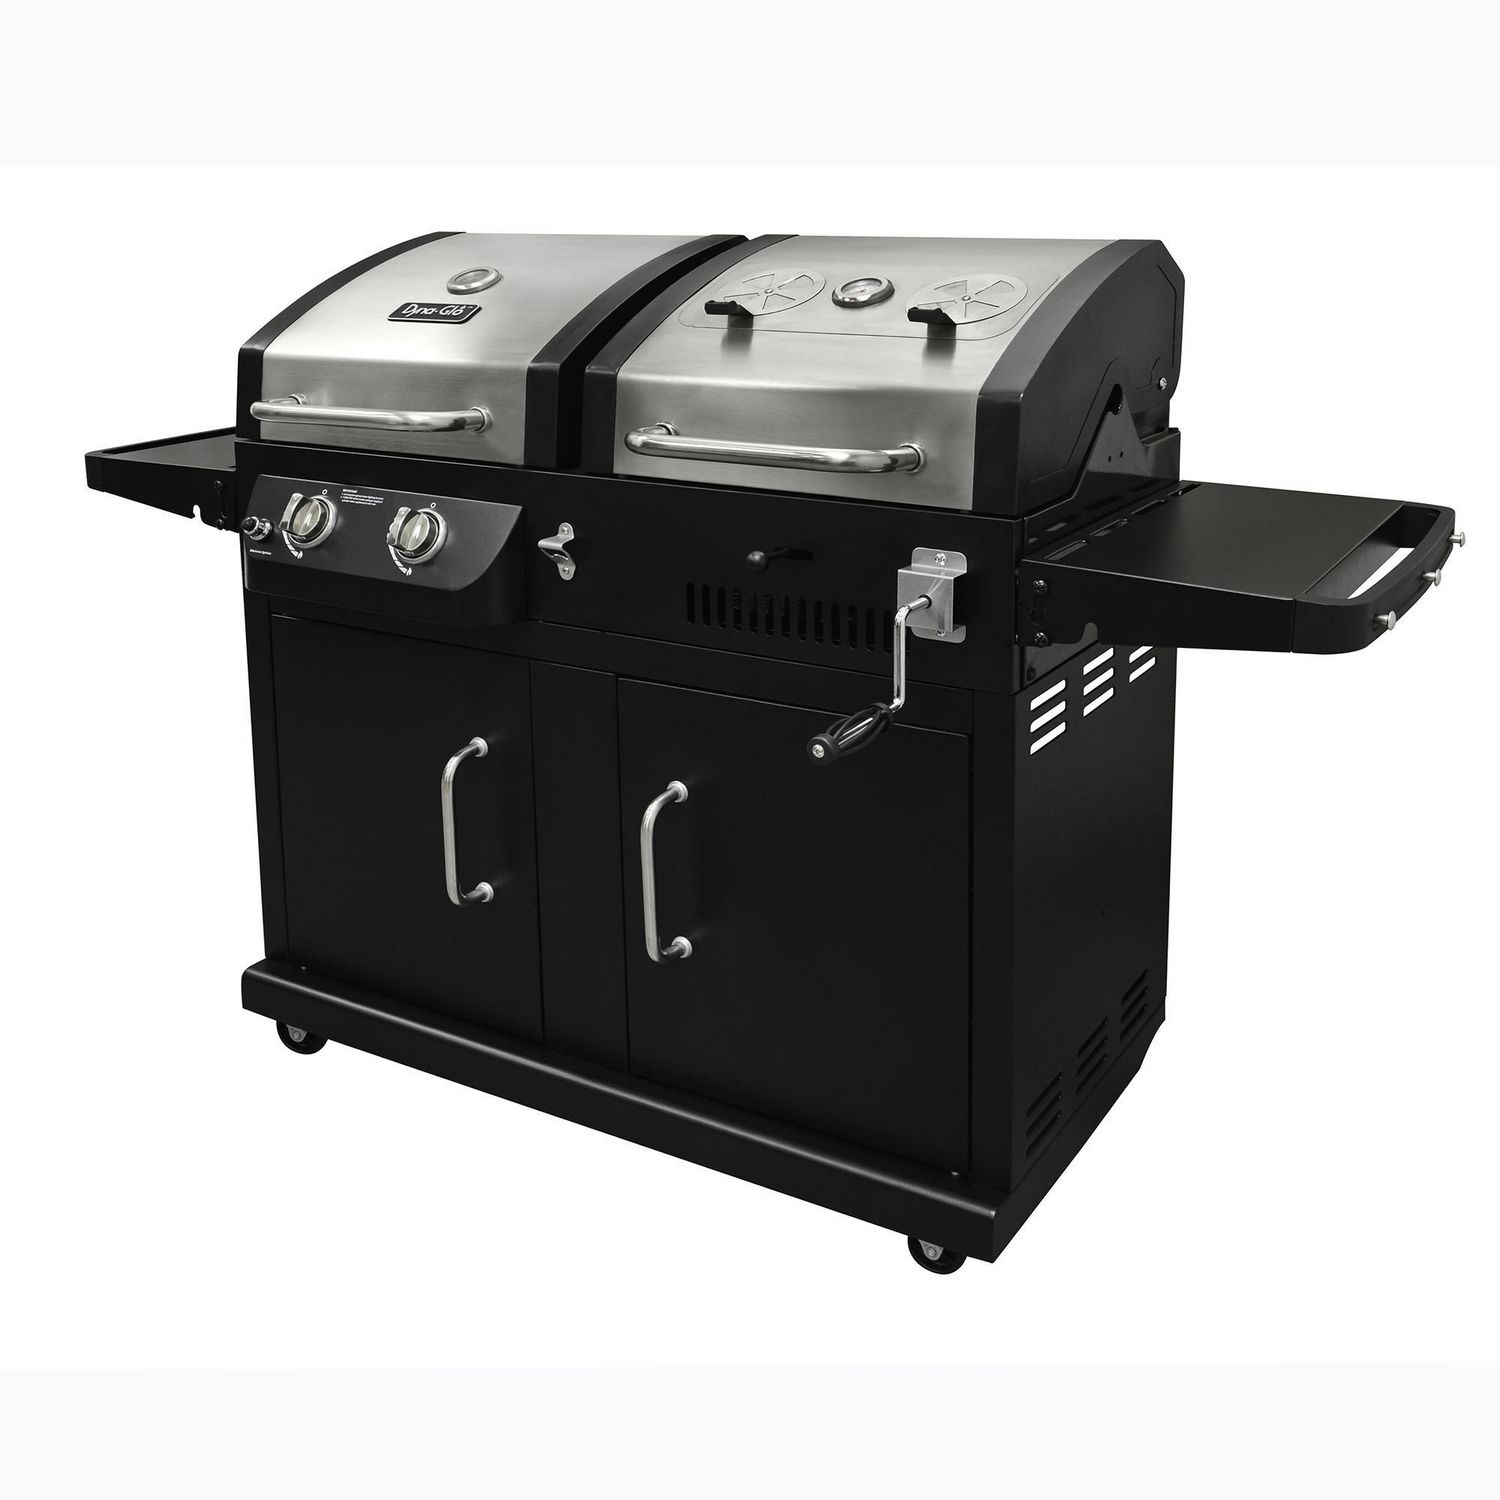 Dyna Glo Grill Reviews: Dyna-Glo DGB730SNB-D Dual Fuel Grill